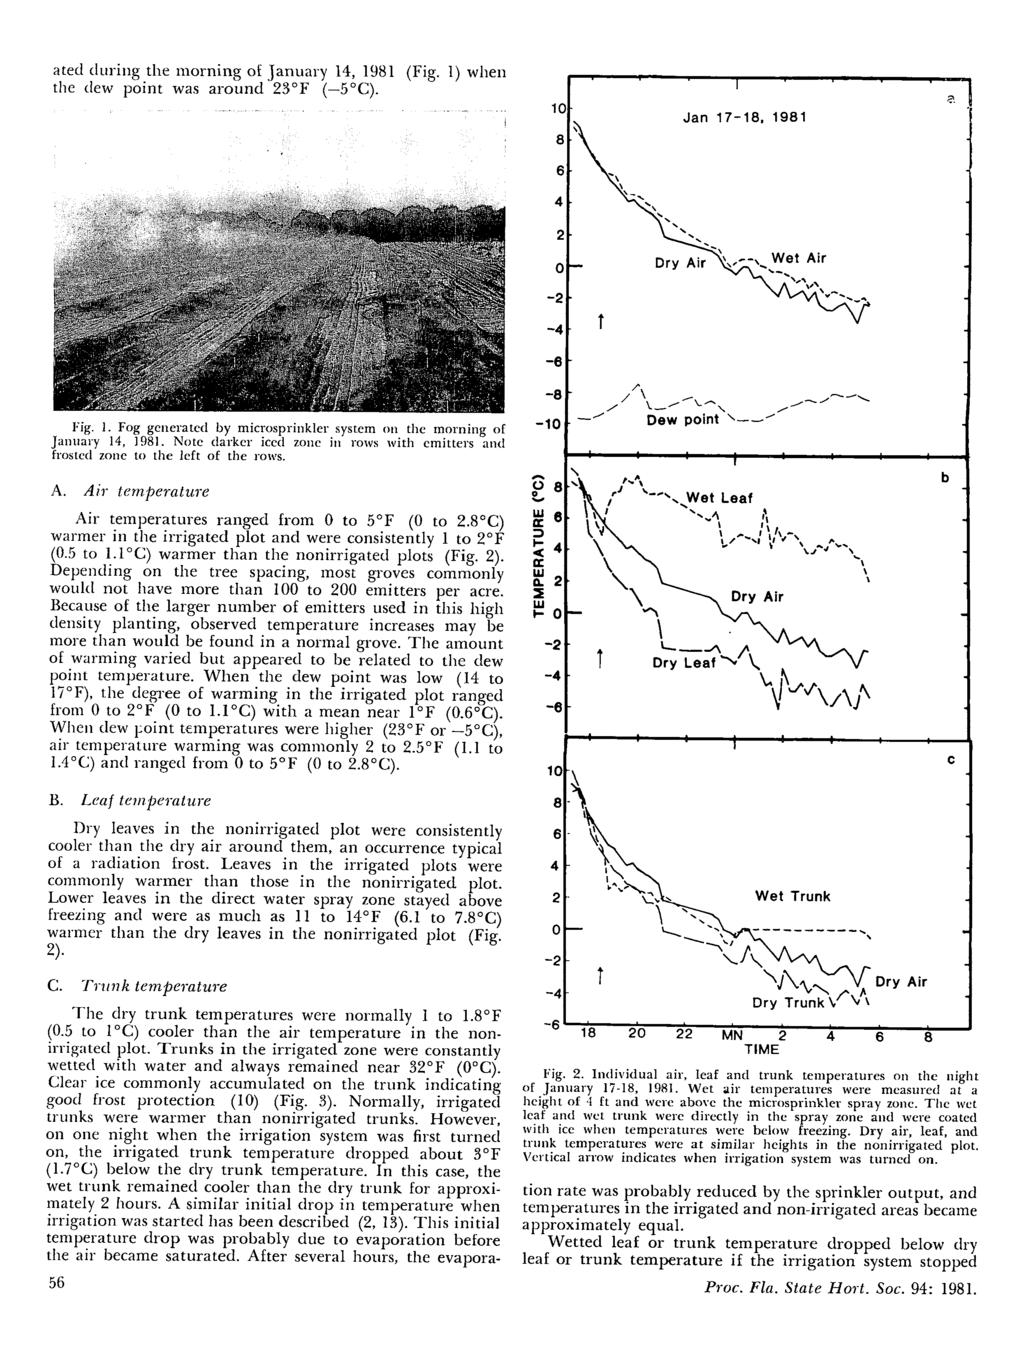 ated during the morning of January 14, 1981 (Fig. 1) when the dew point was around 25 F ( 5 C). Jan 17-18, 1981 Alr Fig. 1. Fog generated by microsprinkler system on the morning of January 14, 1981.